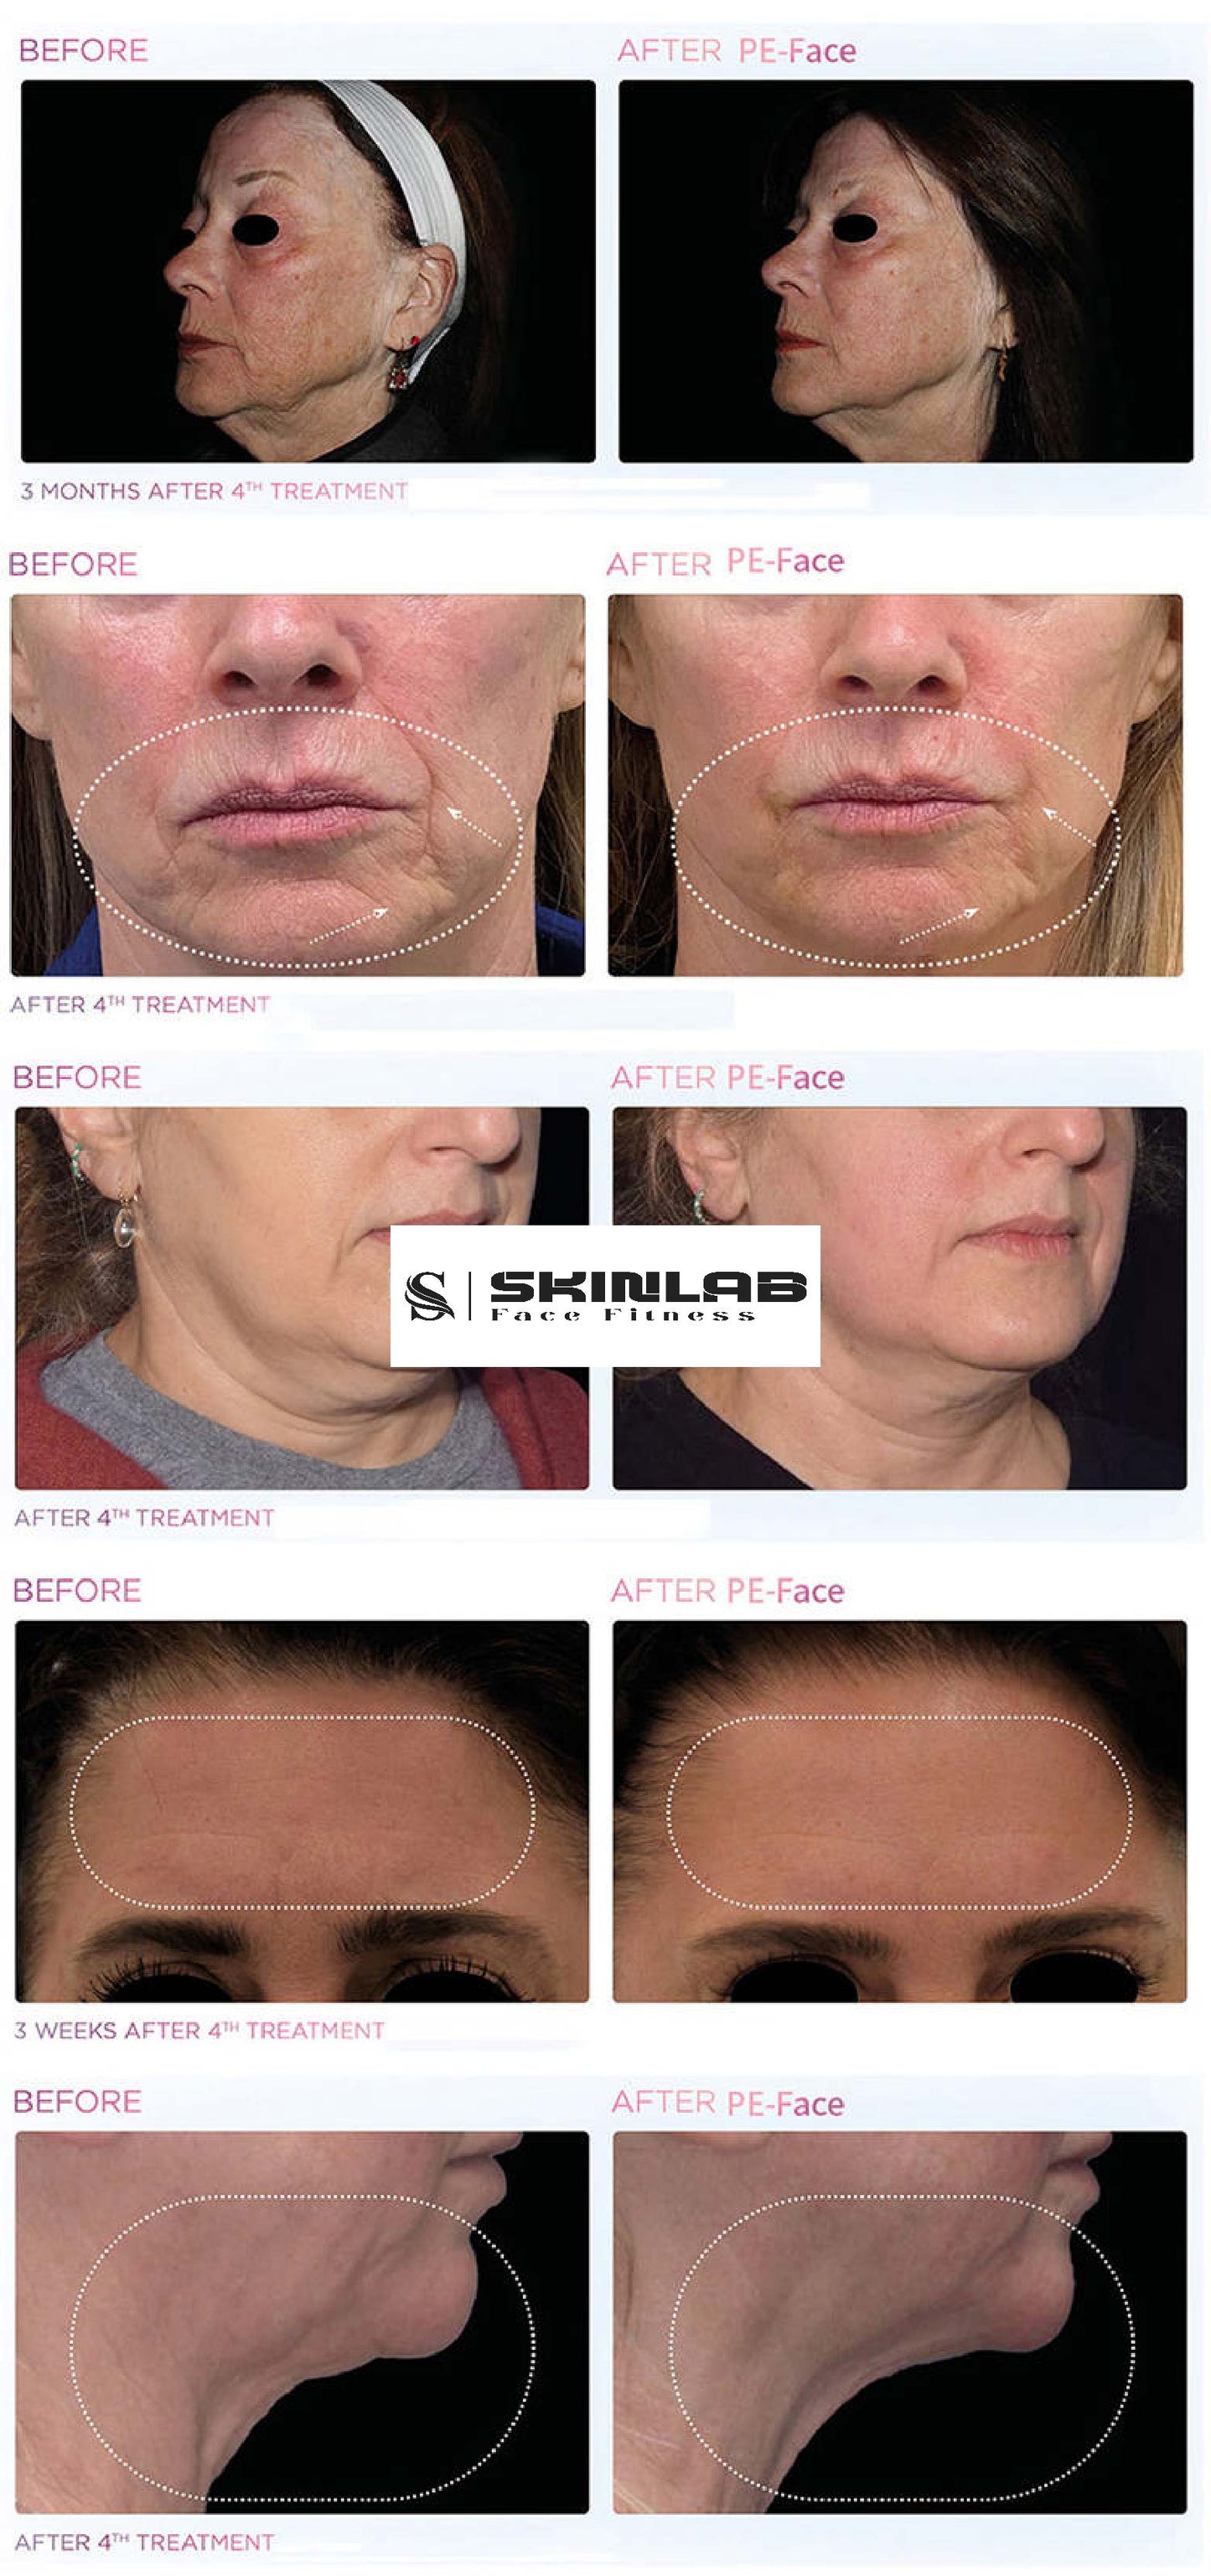 Emface Canberra. Ultraformer 111 Skin tightening & Contouring Treatment. Non Surgical Face Lift. Needle Free Facial Lift procedure RF and HIFES treatment for lifting and firming aging skin. Emface Results More Lift Less Wrinkles 